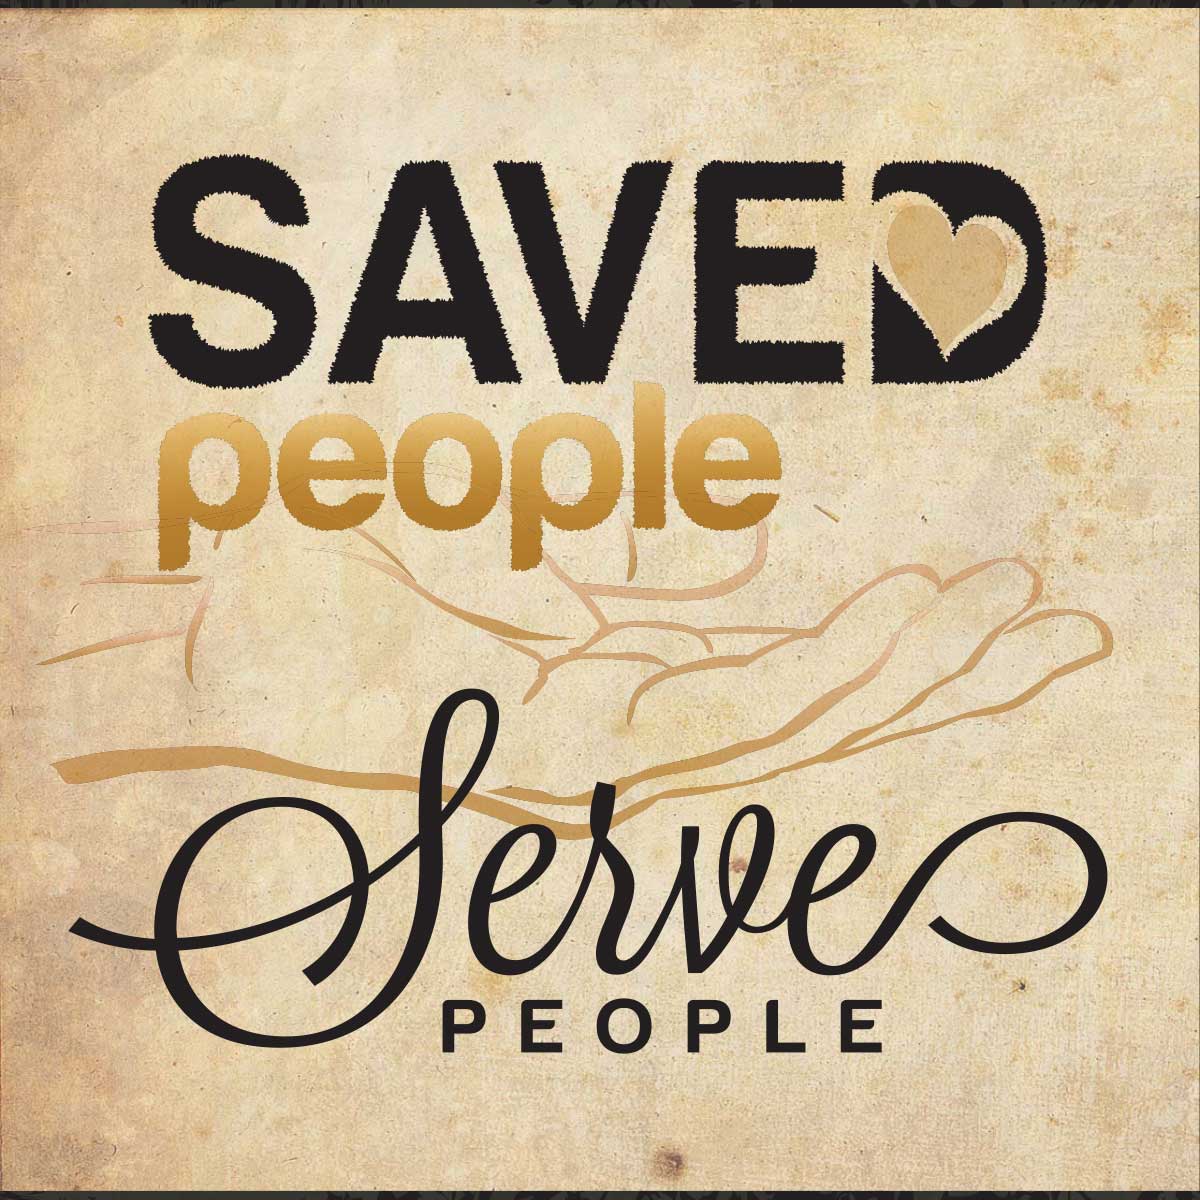 Saved People Serve People - Journey Church in Pineville Core Value